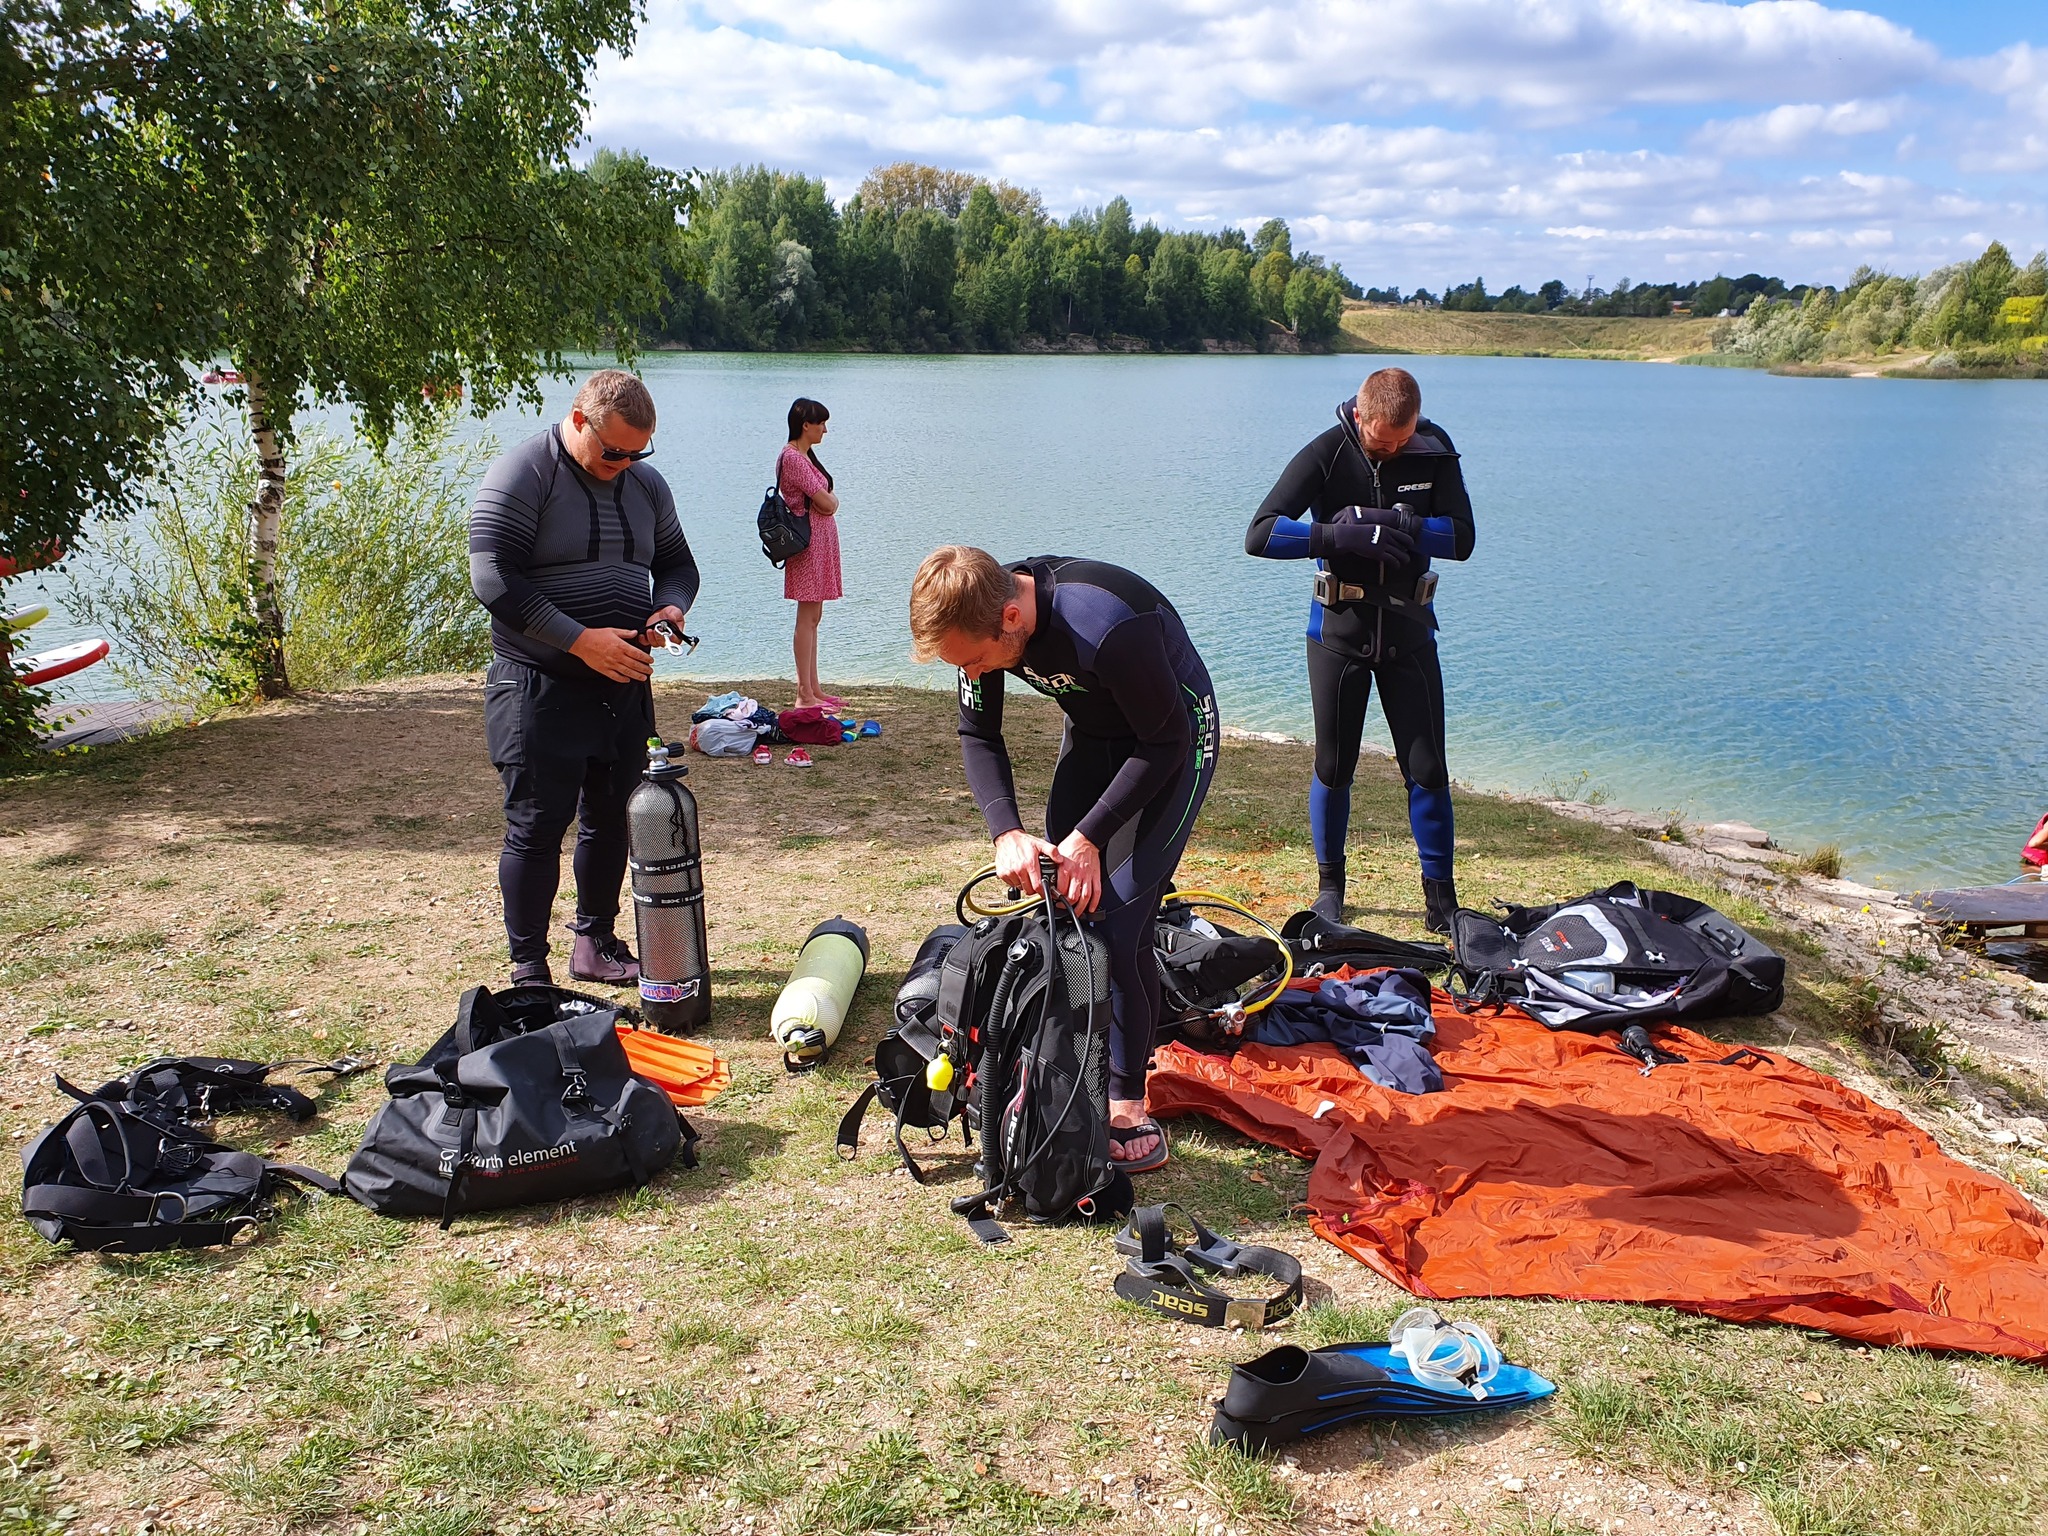 Divers are cleaning the reservoir from the waste that has accumulated there for decades